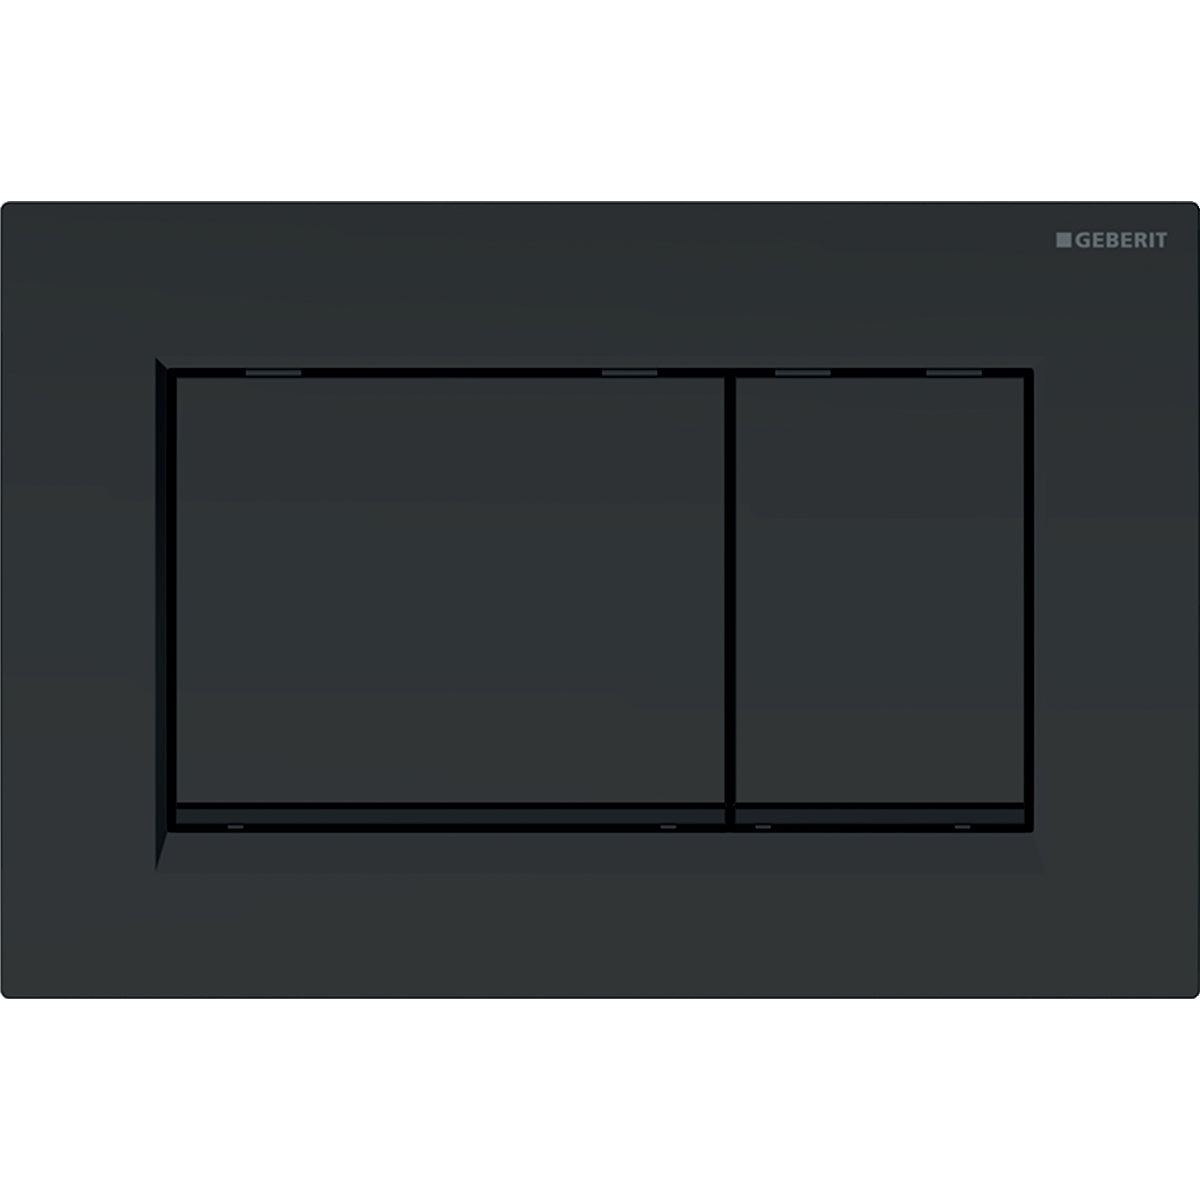 Geberit 115.883.16.1- Geberit actuator plate Sigma30 for dual flush: black matt coated, easy-to-clean coated, black - FaucetExpress.ca